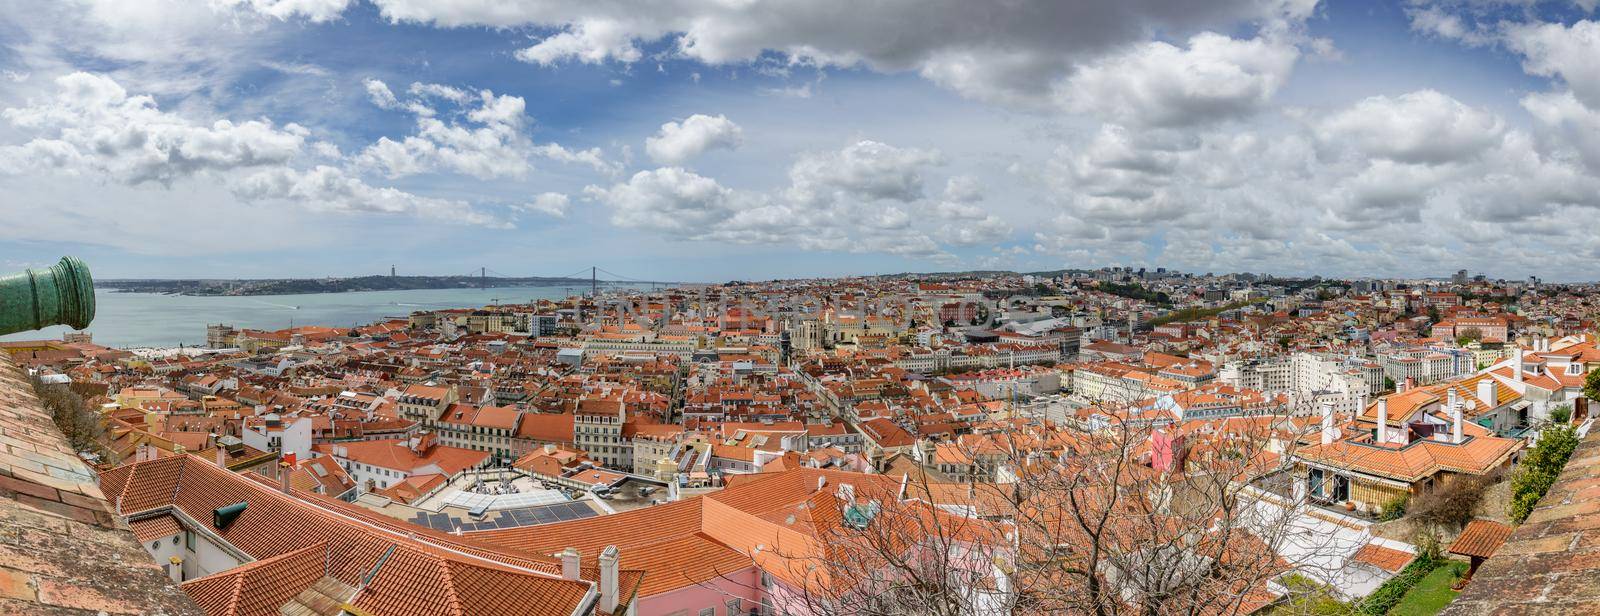 Panoramic view of Lisbon downtown from Castelo Sao Jorge